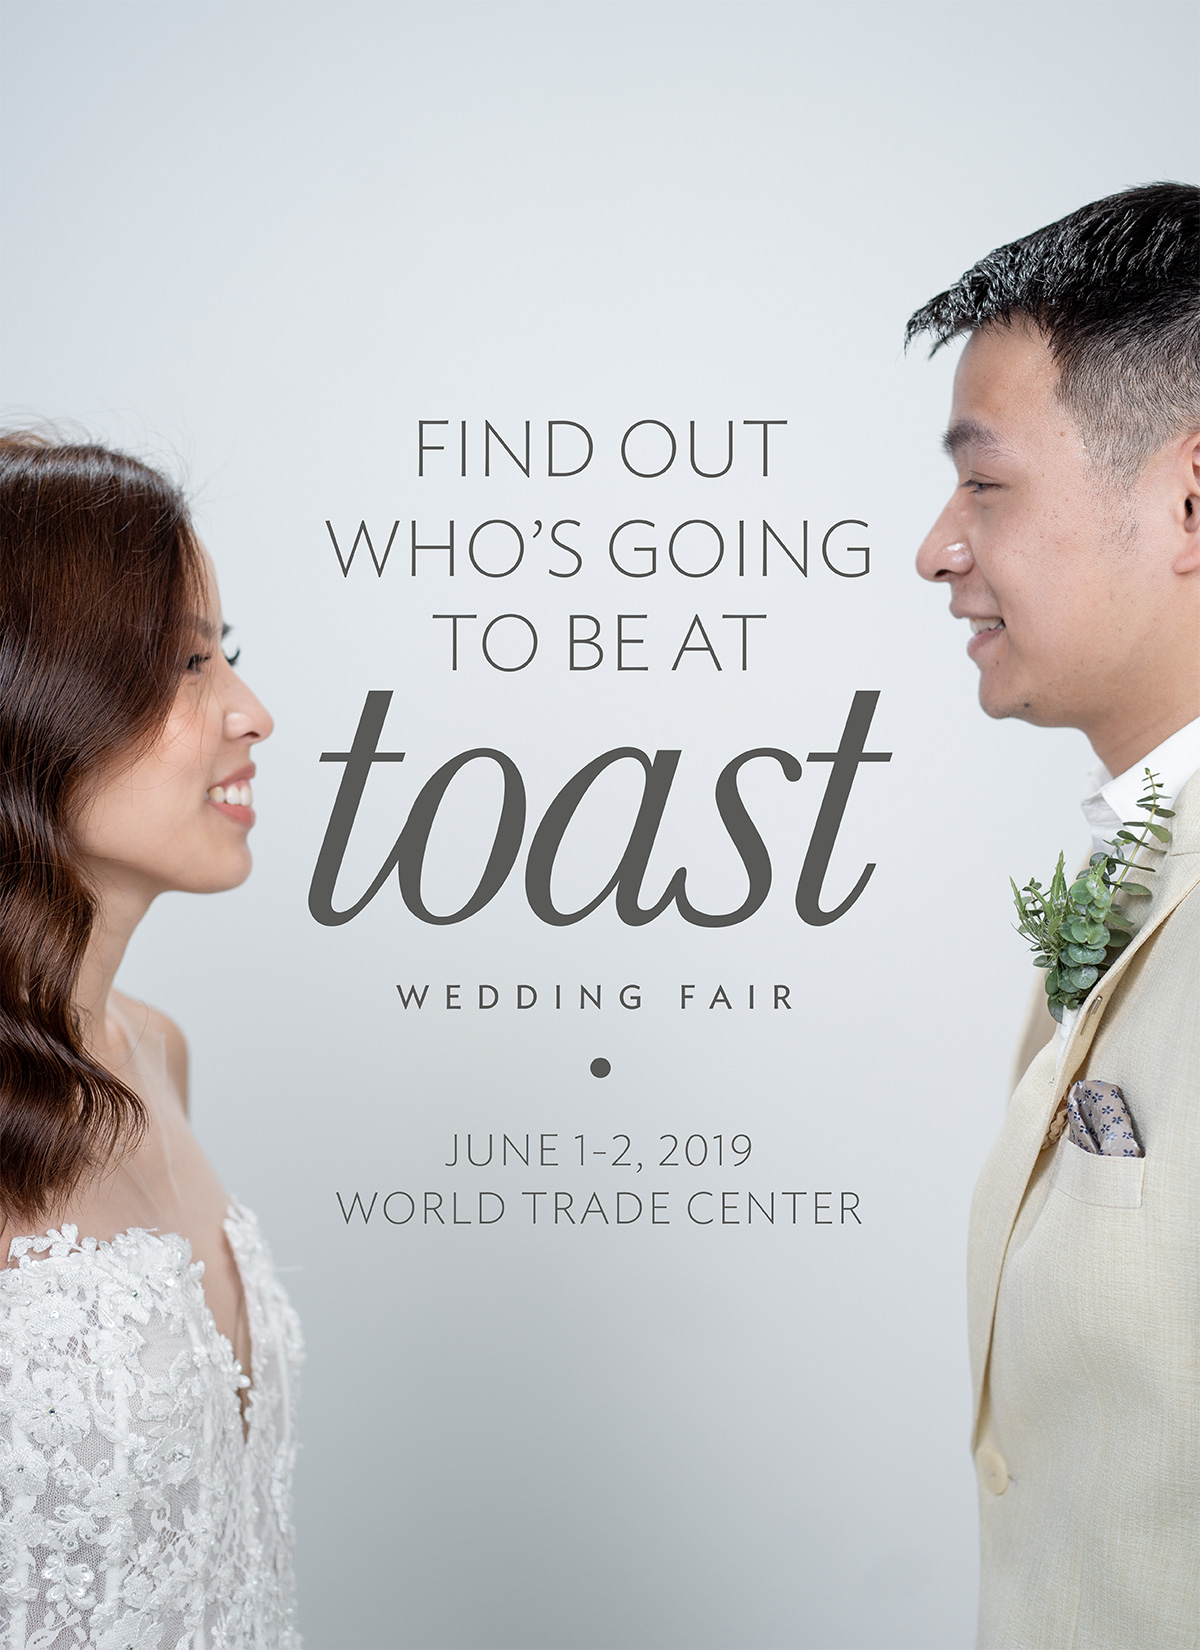 Find out who's going to be at Toast Wedding Fair. June 1-2, 2019, World Trade Center